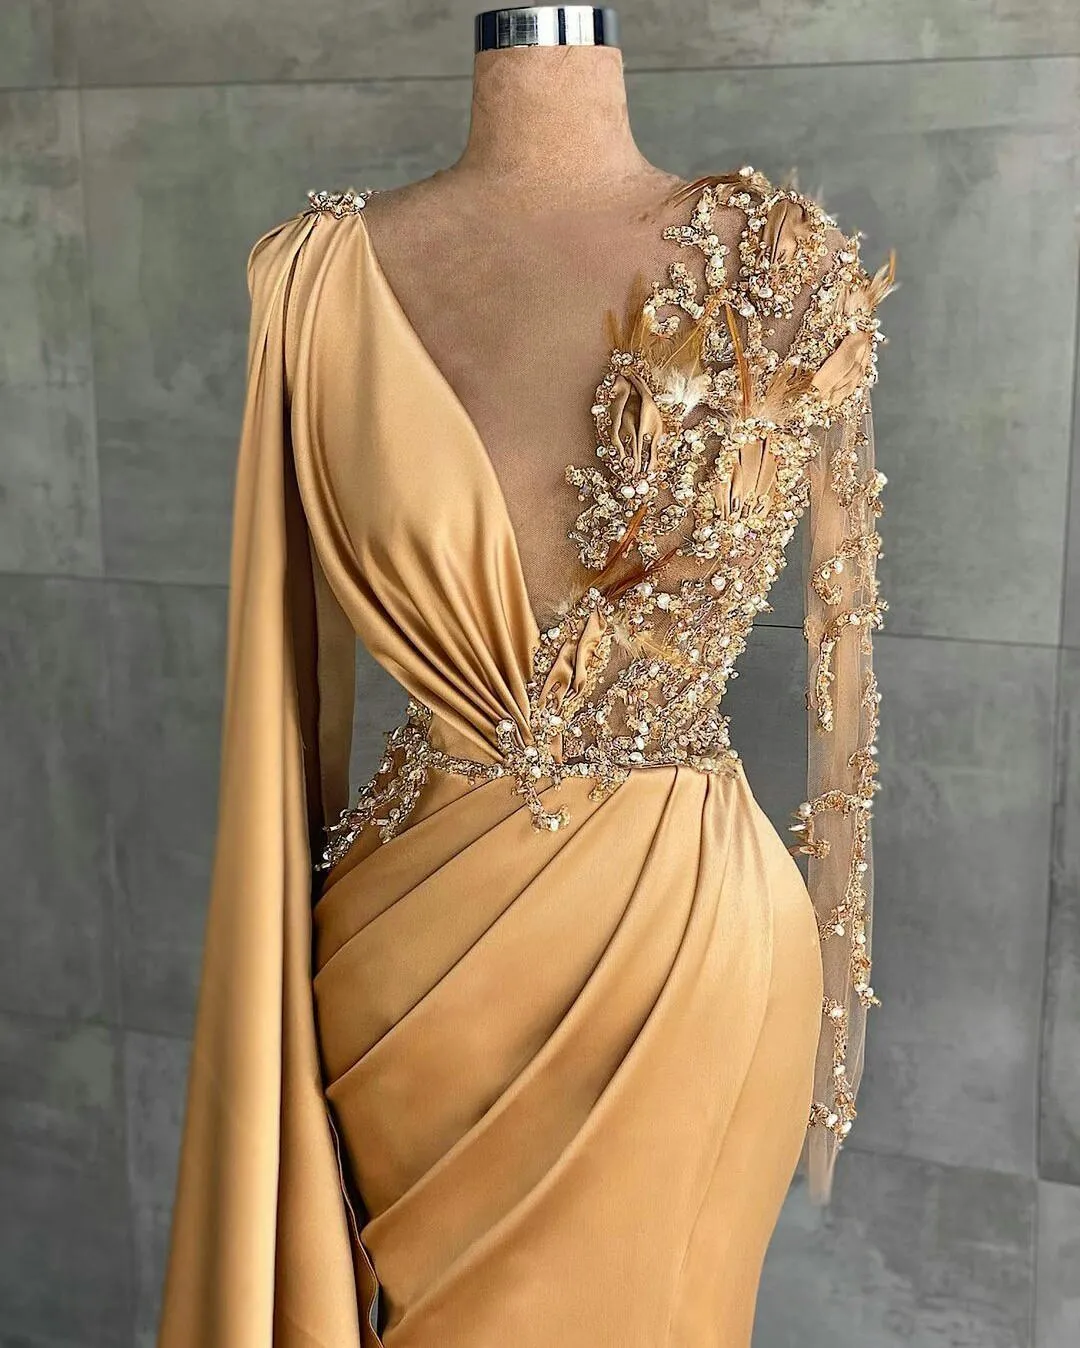 Fitted Stretch Satin Gathered Waistband Gold Evening Gown CH236G | Satin  evening gown, Evening gowns, Evening dresses